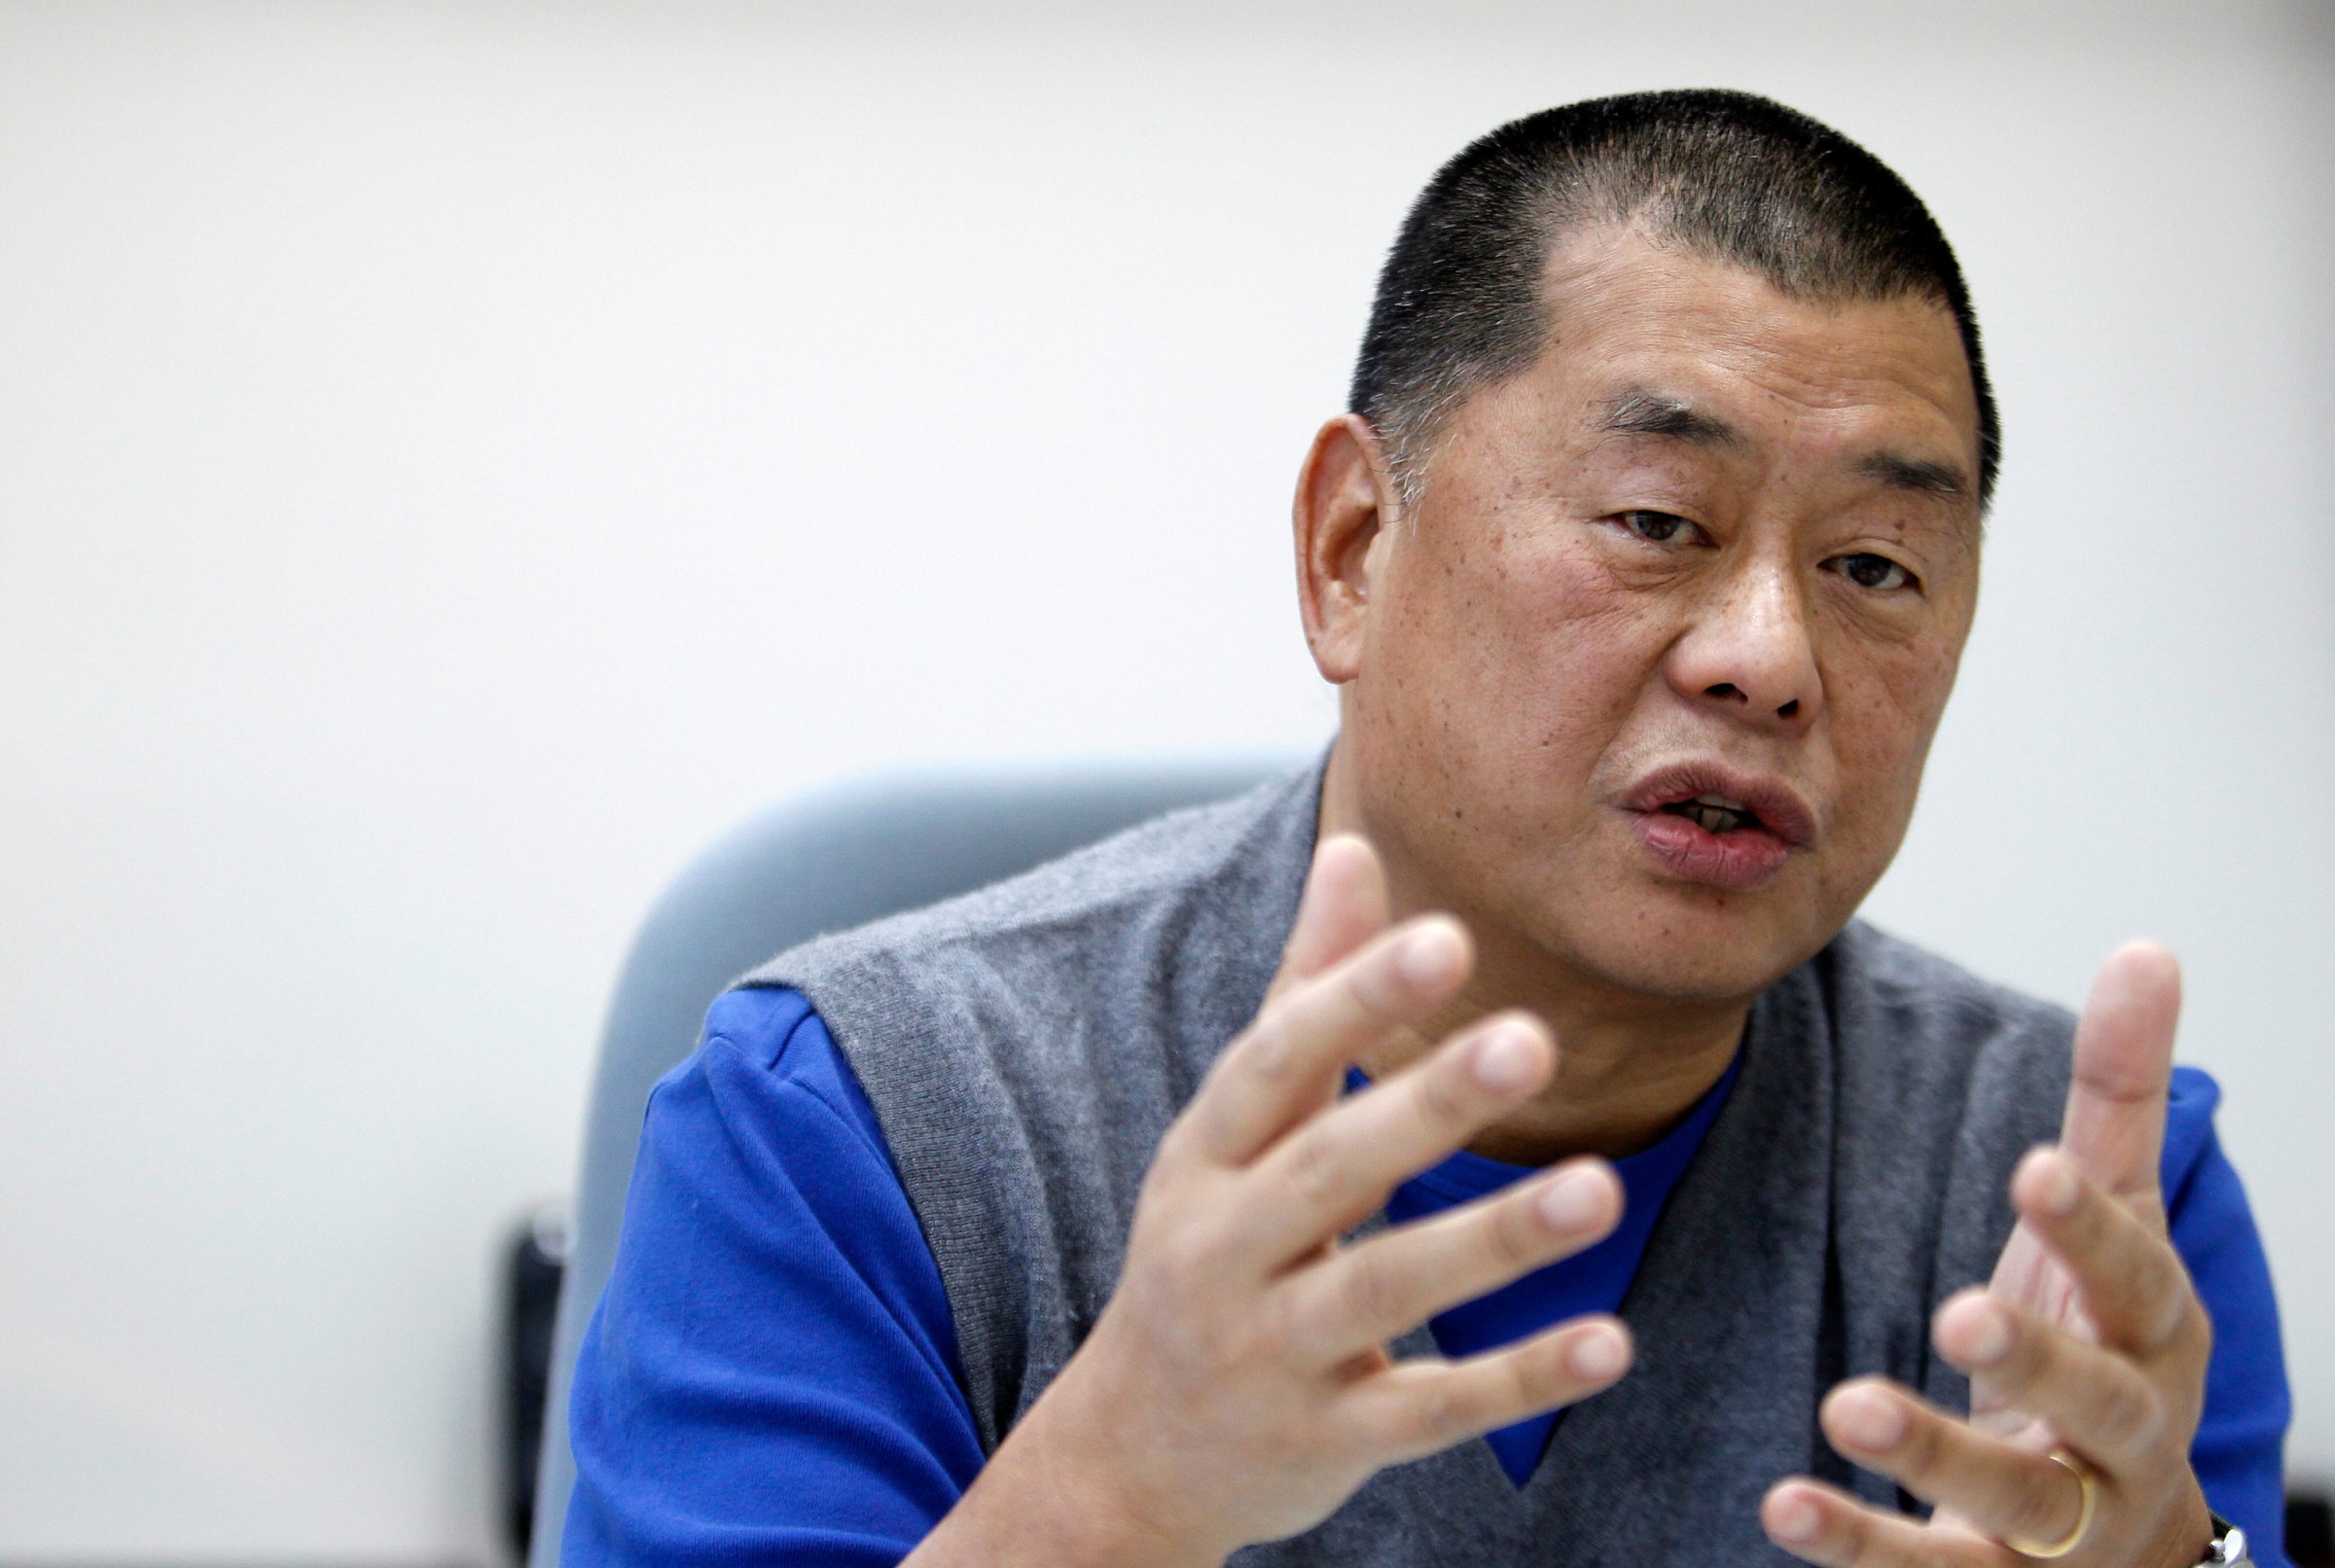 Jimmy Lai, chairman and founder of Next Media, speaks during an exclusive interview with Reuters in Taipei